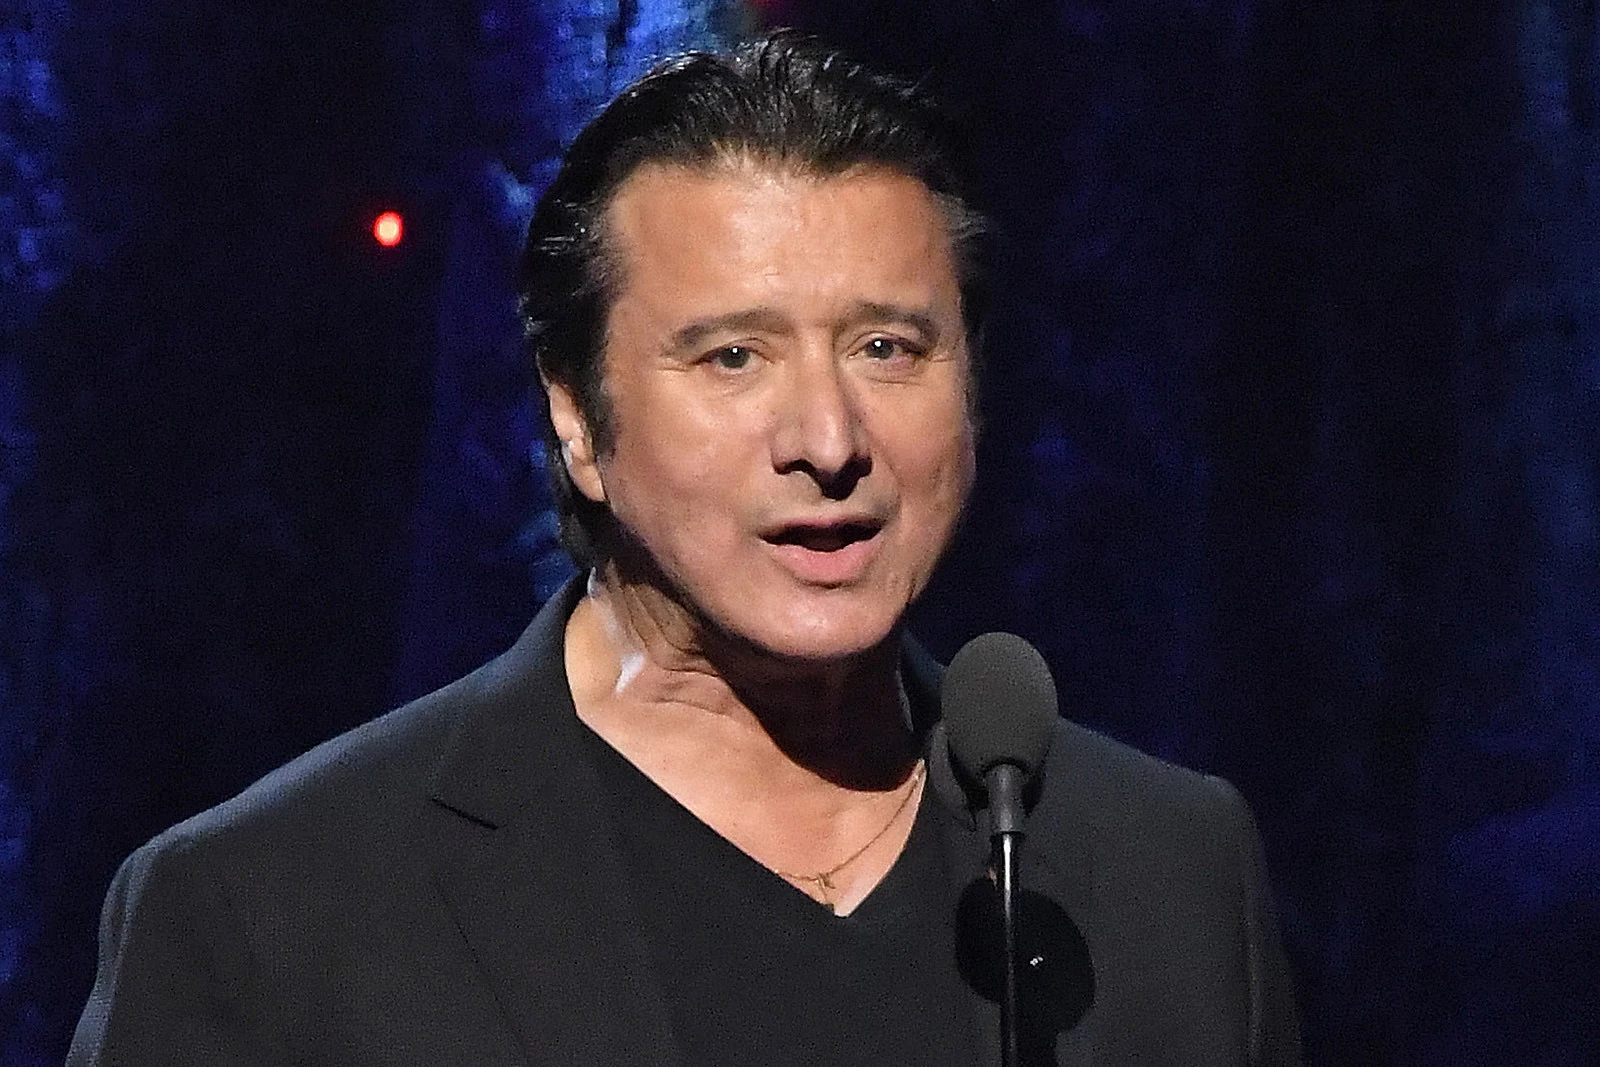 Watch: Steve Perry Previews New Holiday Song 'Maybe This Year'